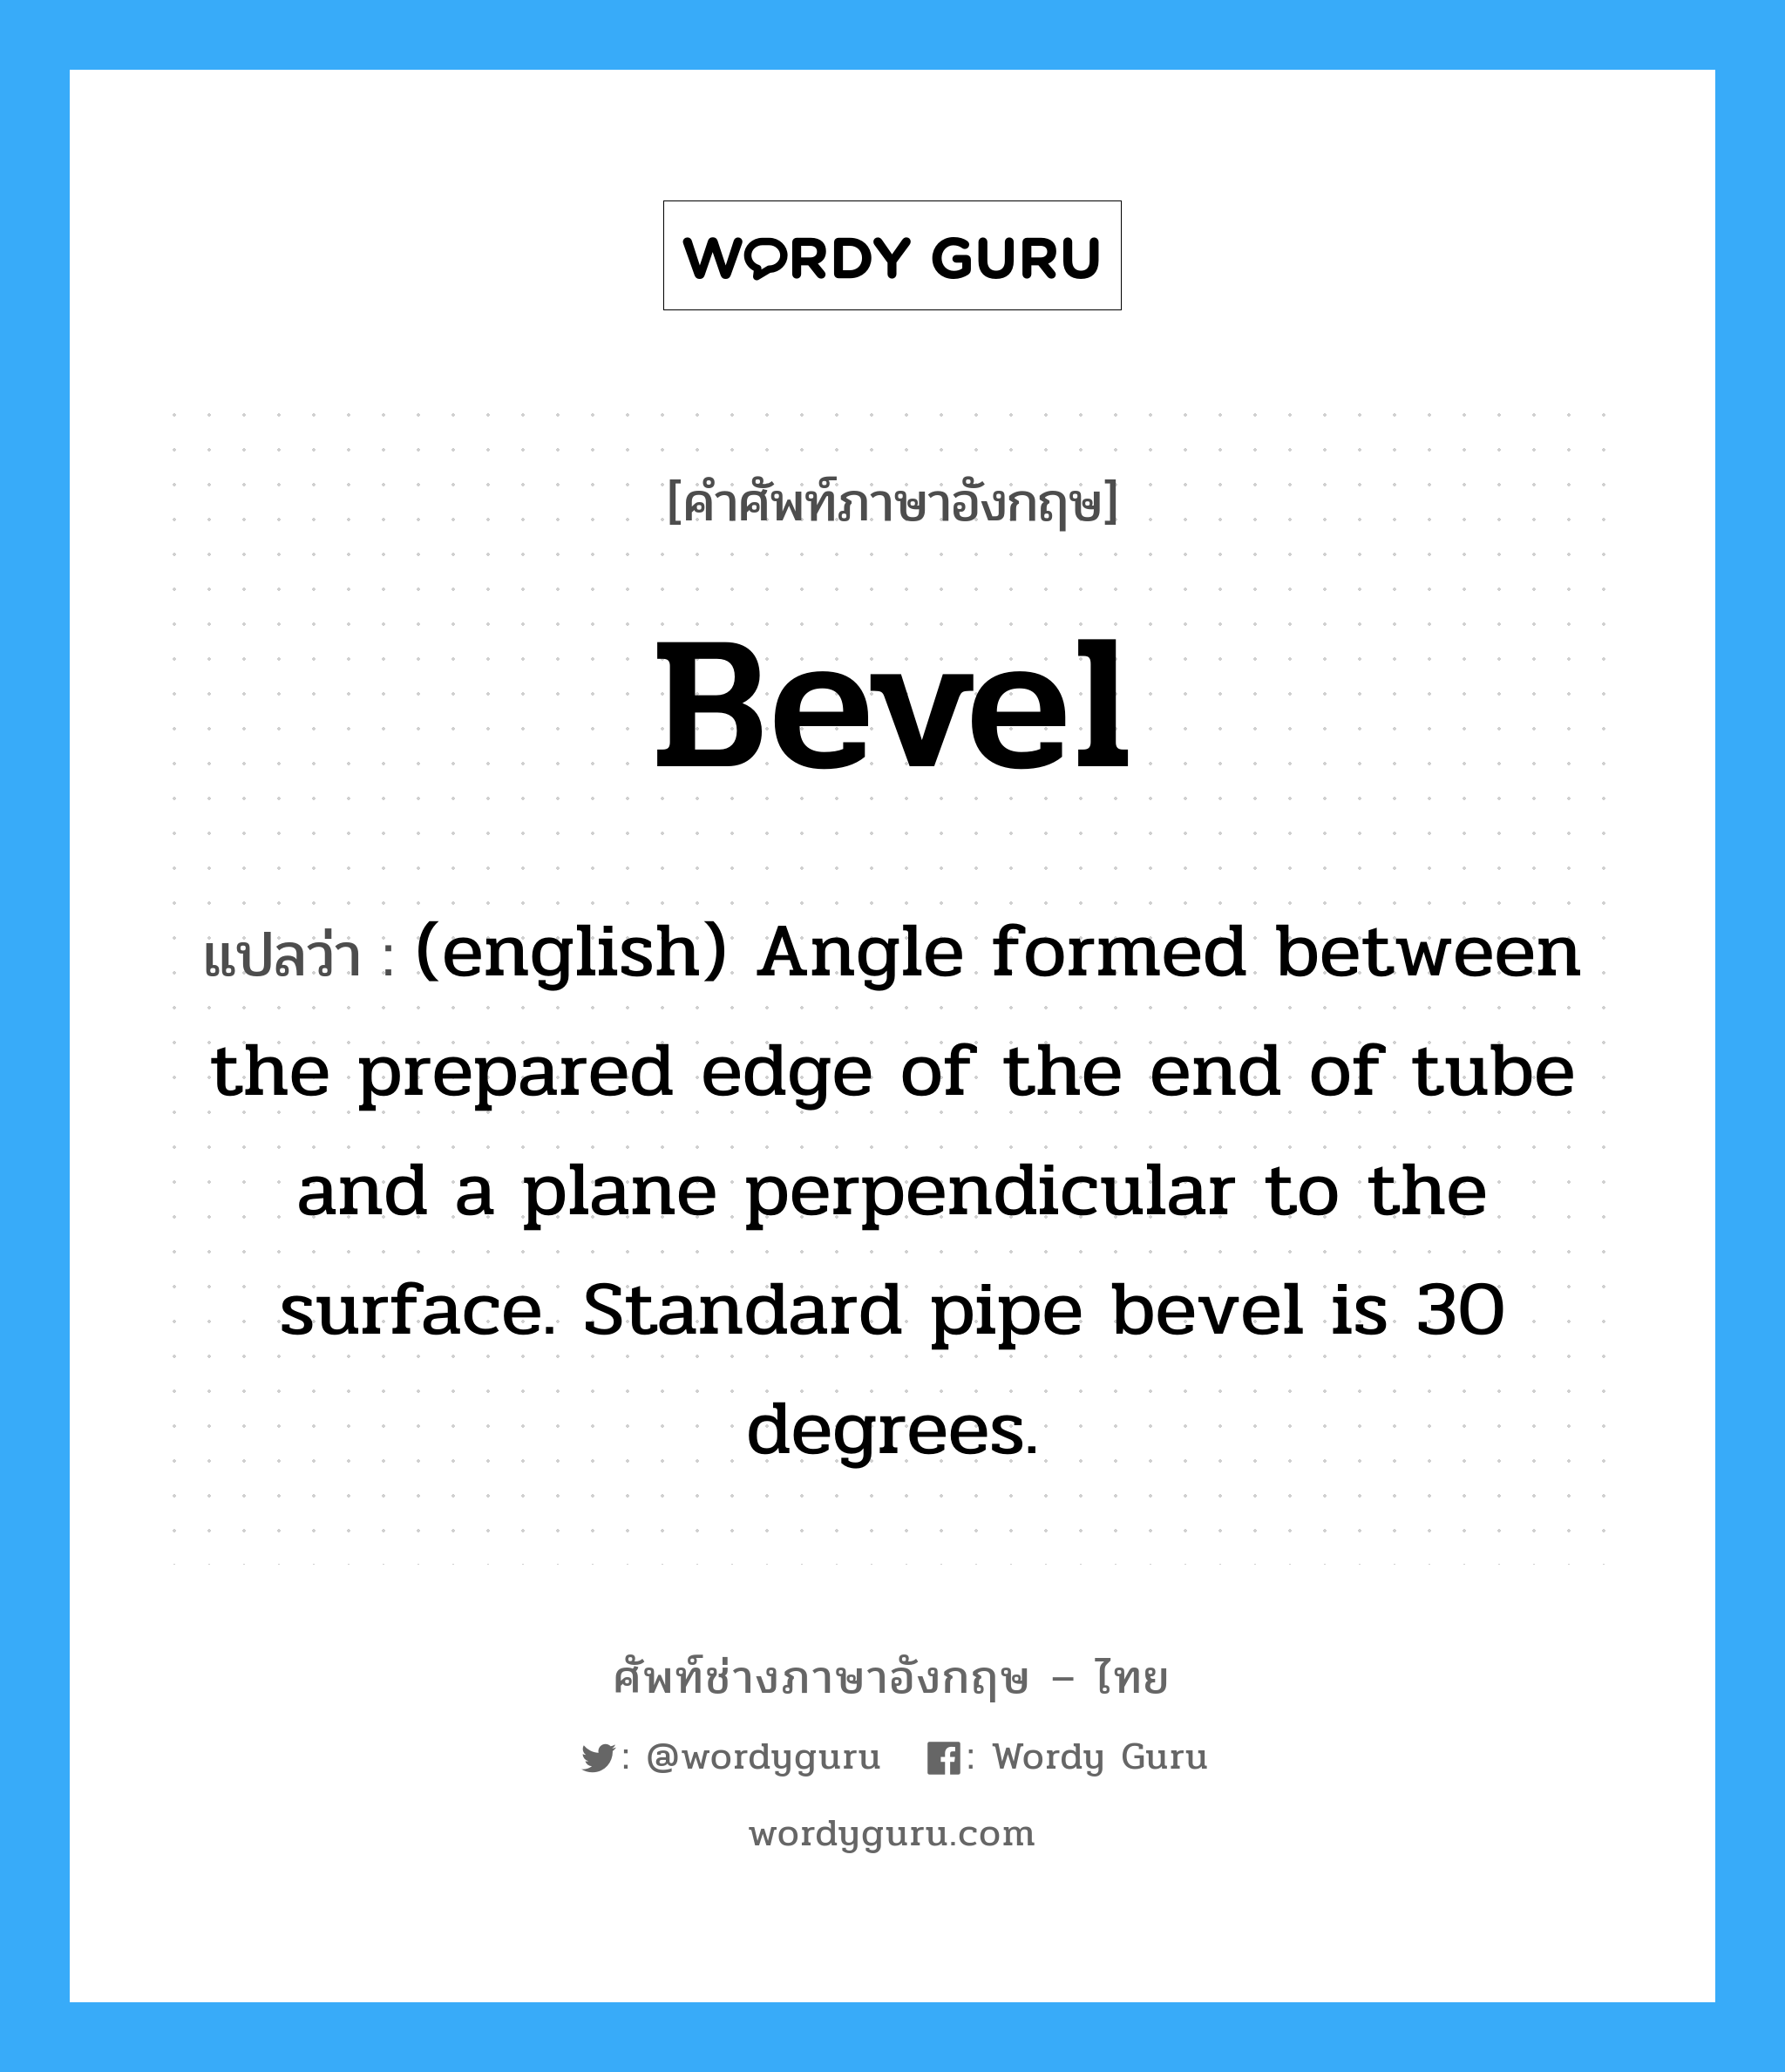 Bevel แปลว่า?, คำศัพท์ช่างภาษาอังกฤษ - ไทย Bevel คำศัพท์ภาษาอังกฤษ Bevel แปลว่า (english) Angle formed between the prepared edge of the end of tube and a plane perpendicular to the surface. Standard pipe bevel is 30 degrees.